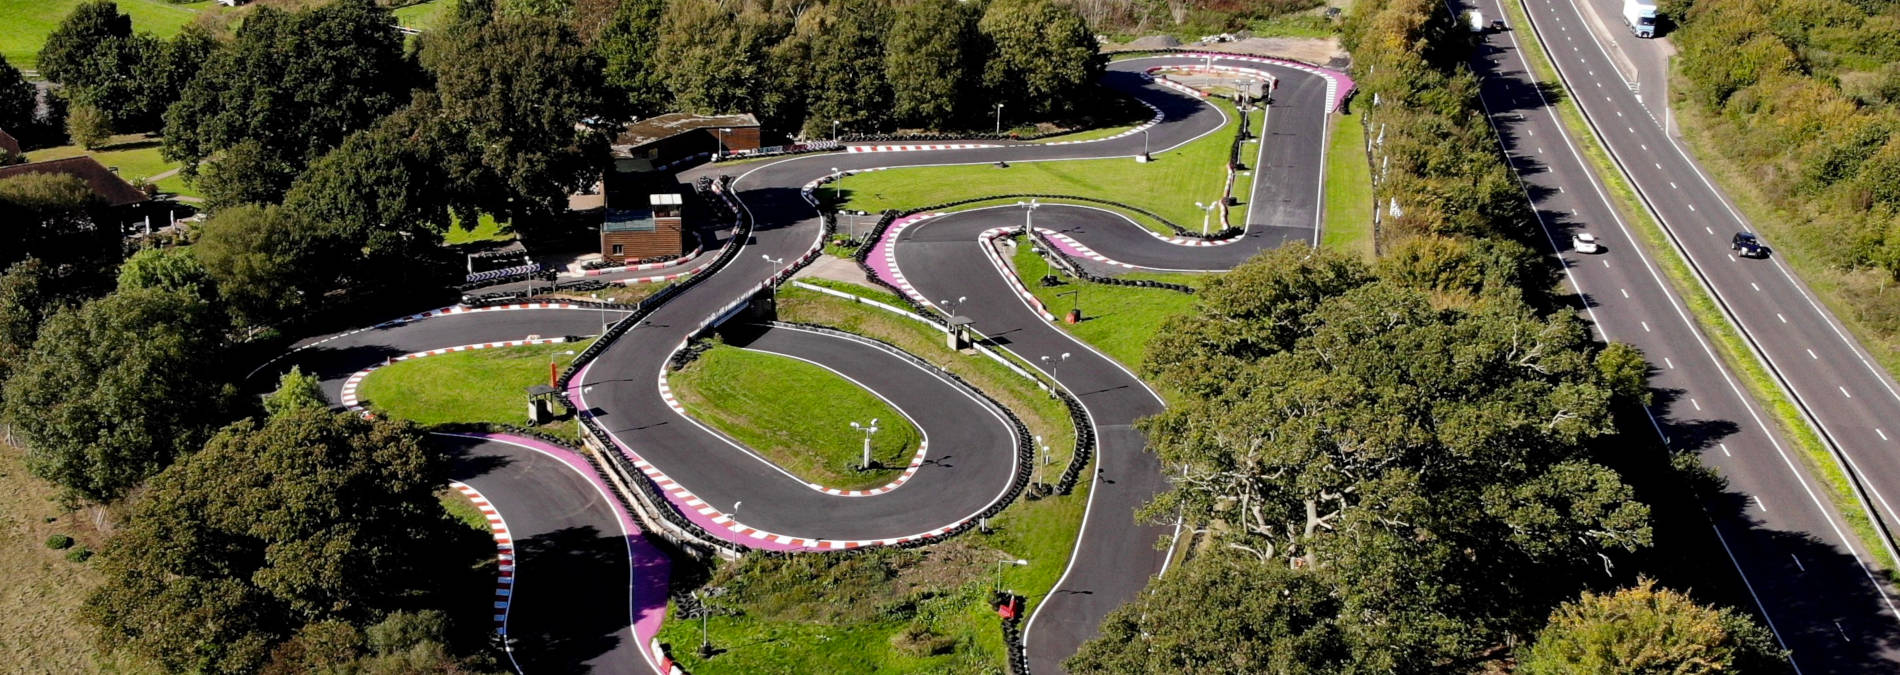 View of go karting track